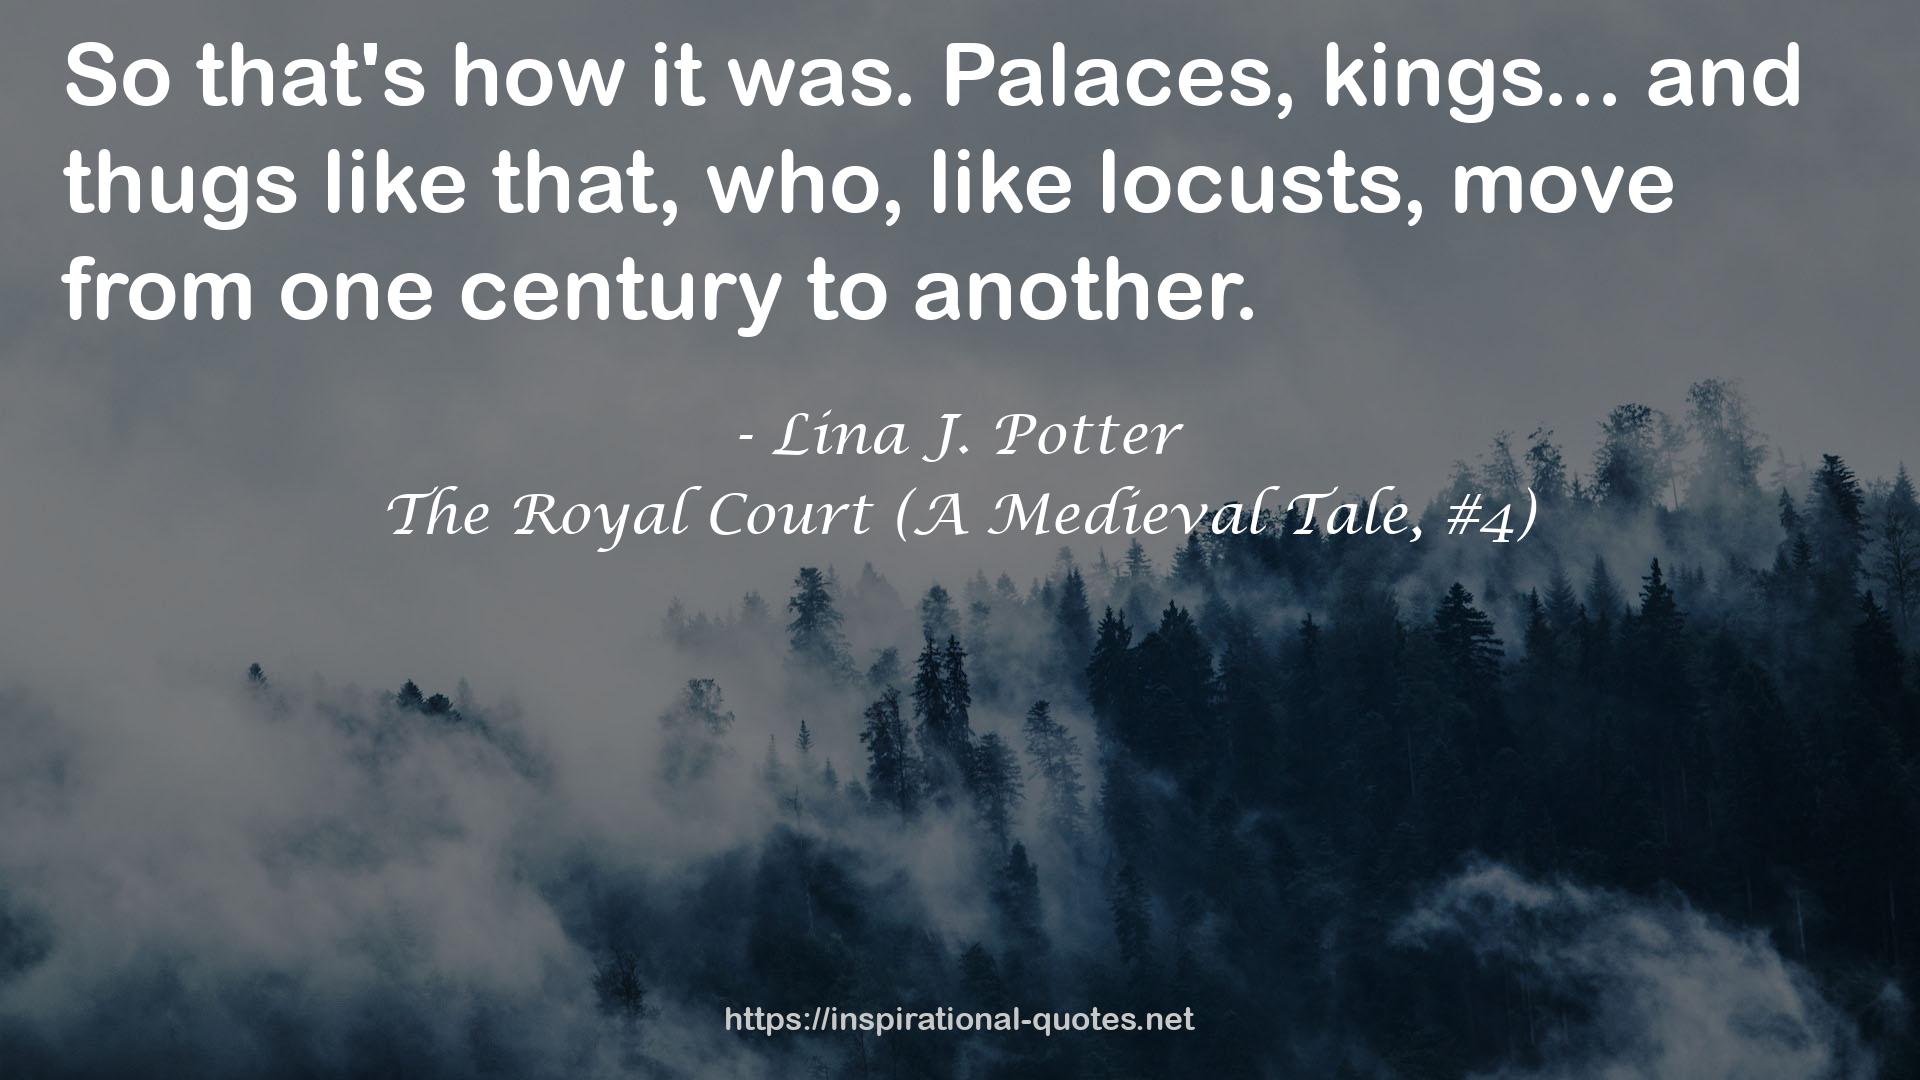 The Royal Court (A Medieval Tale, #4) QUOTES